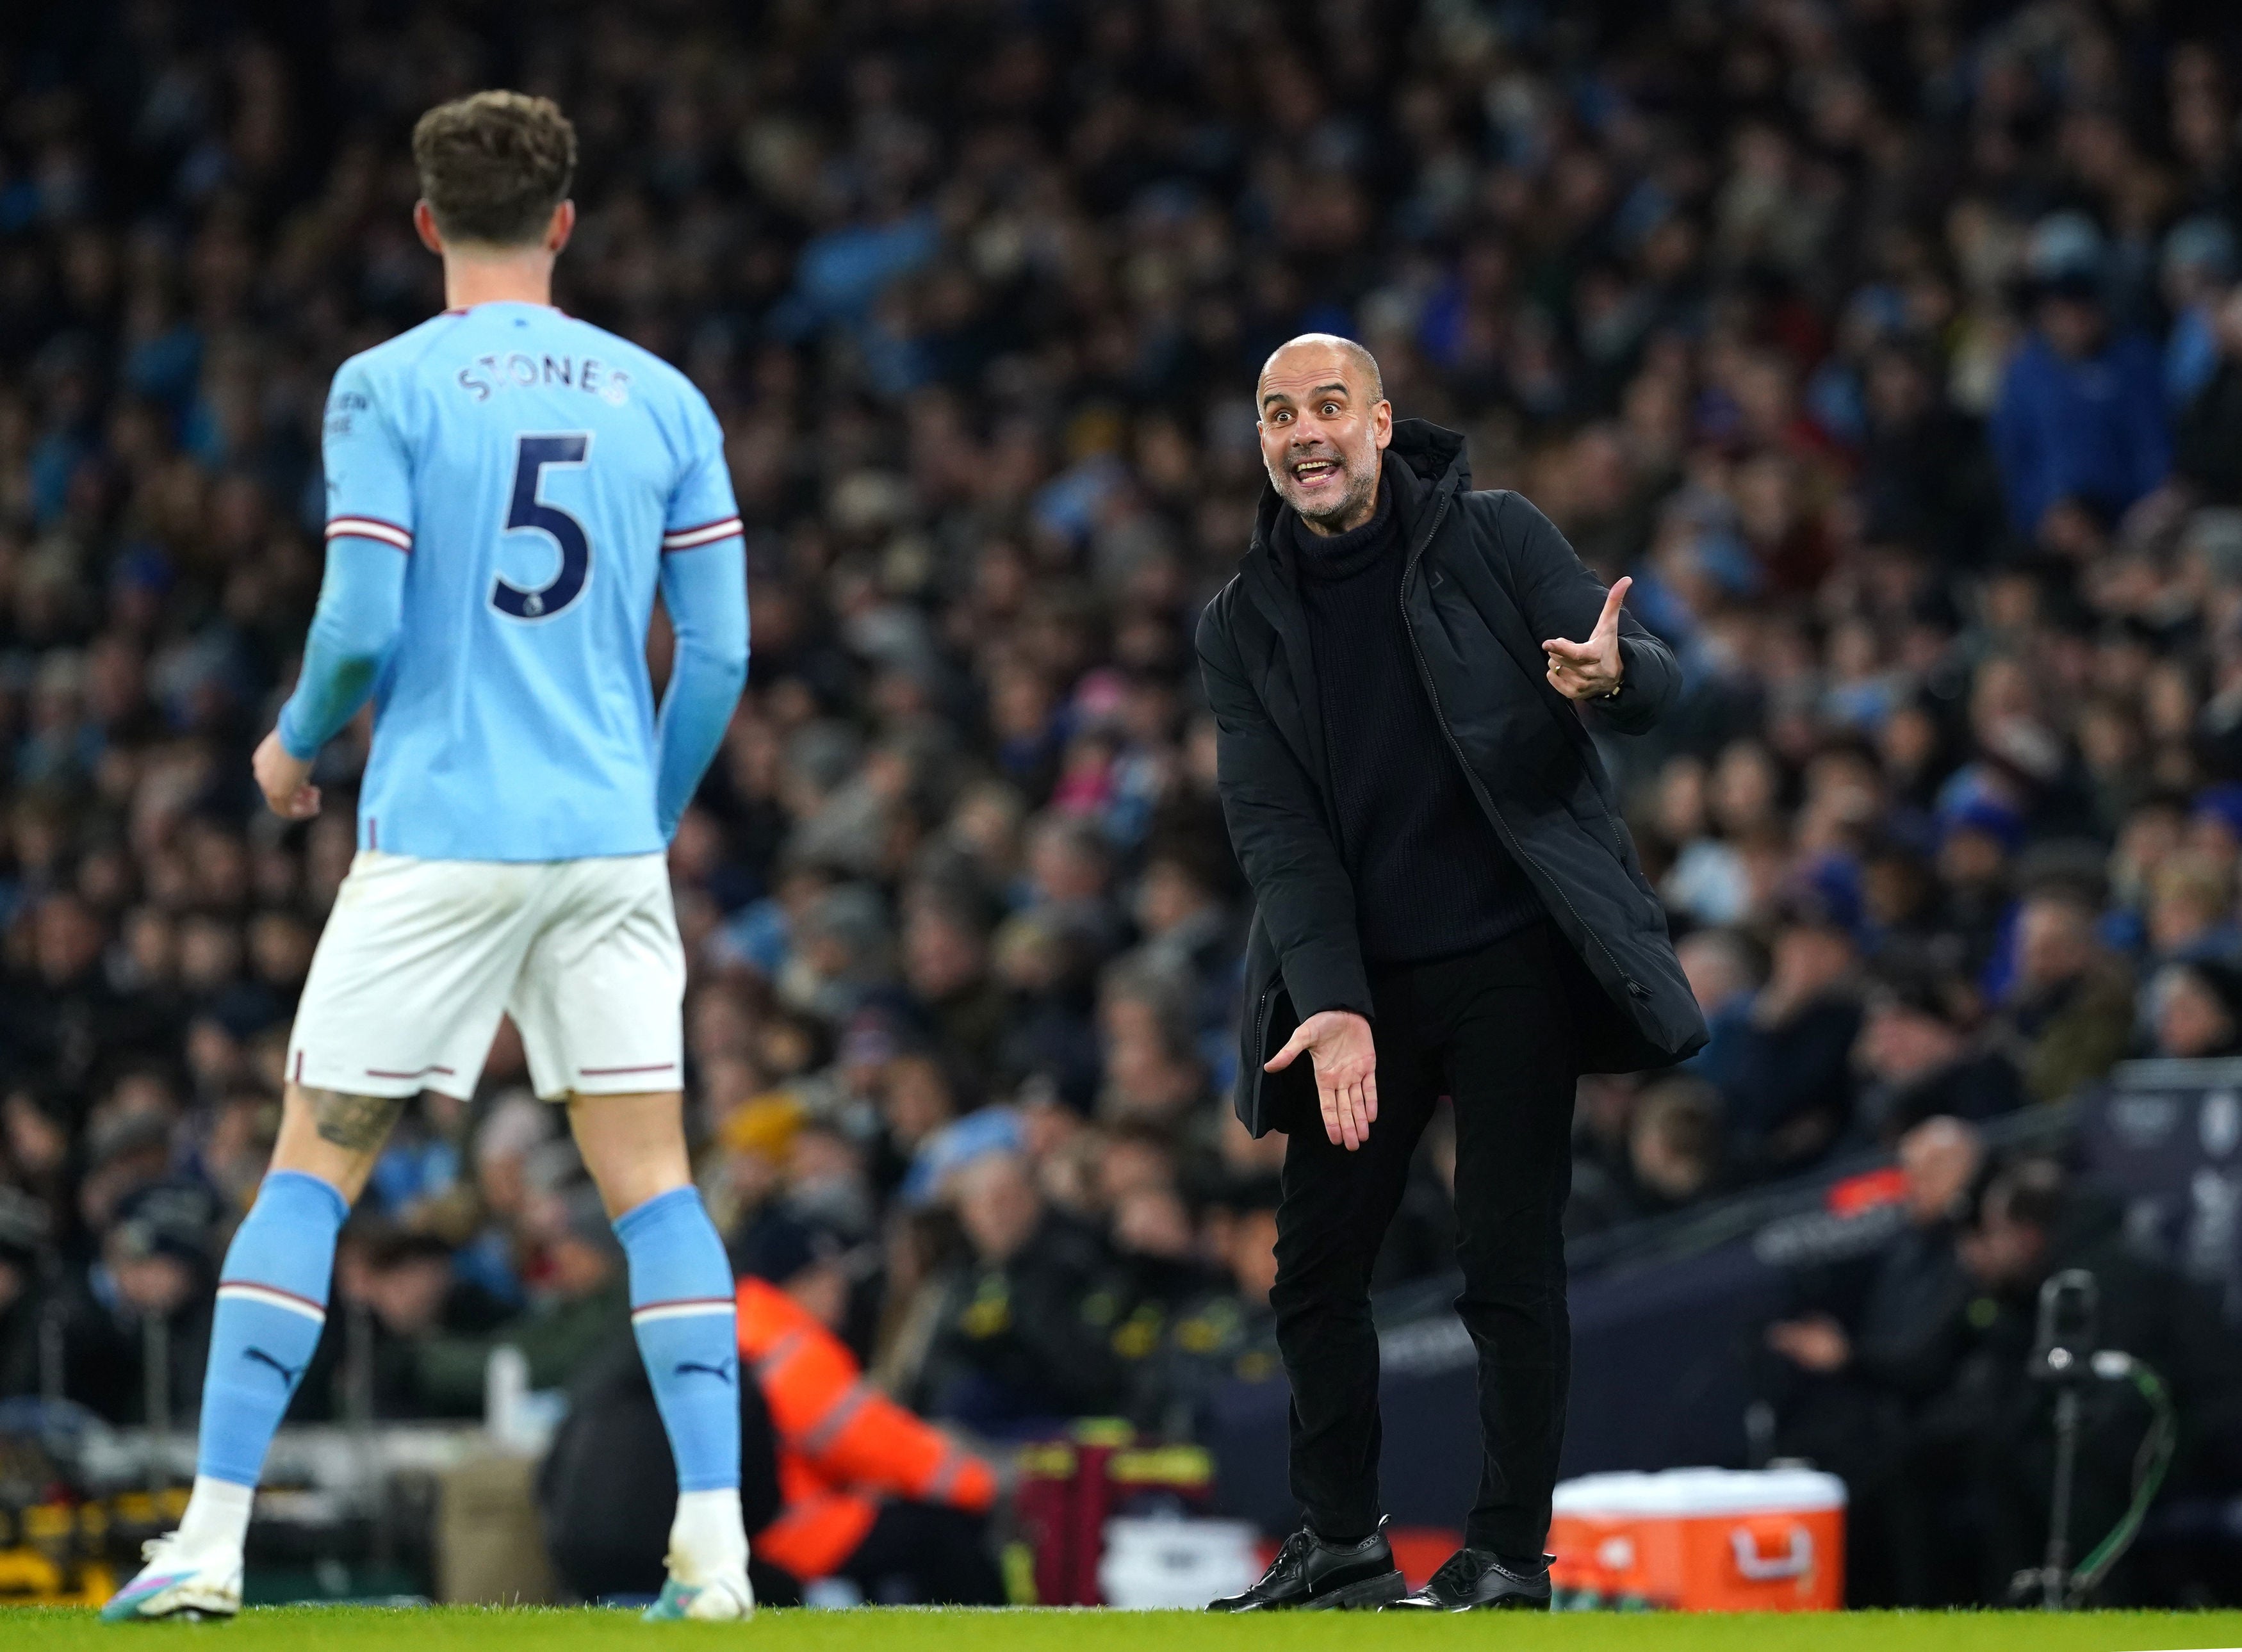 Pep Guardiola gesticulates from the touchline during City’s win over Spurs